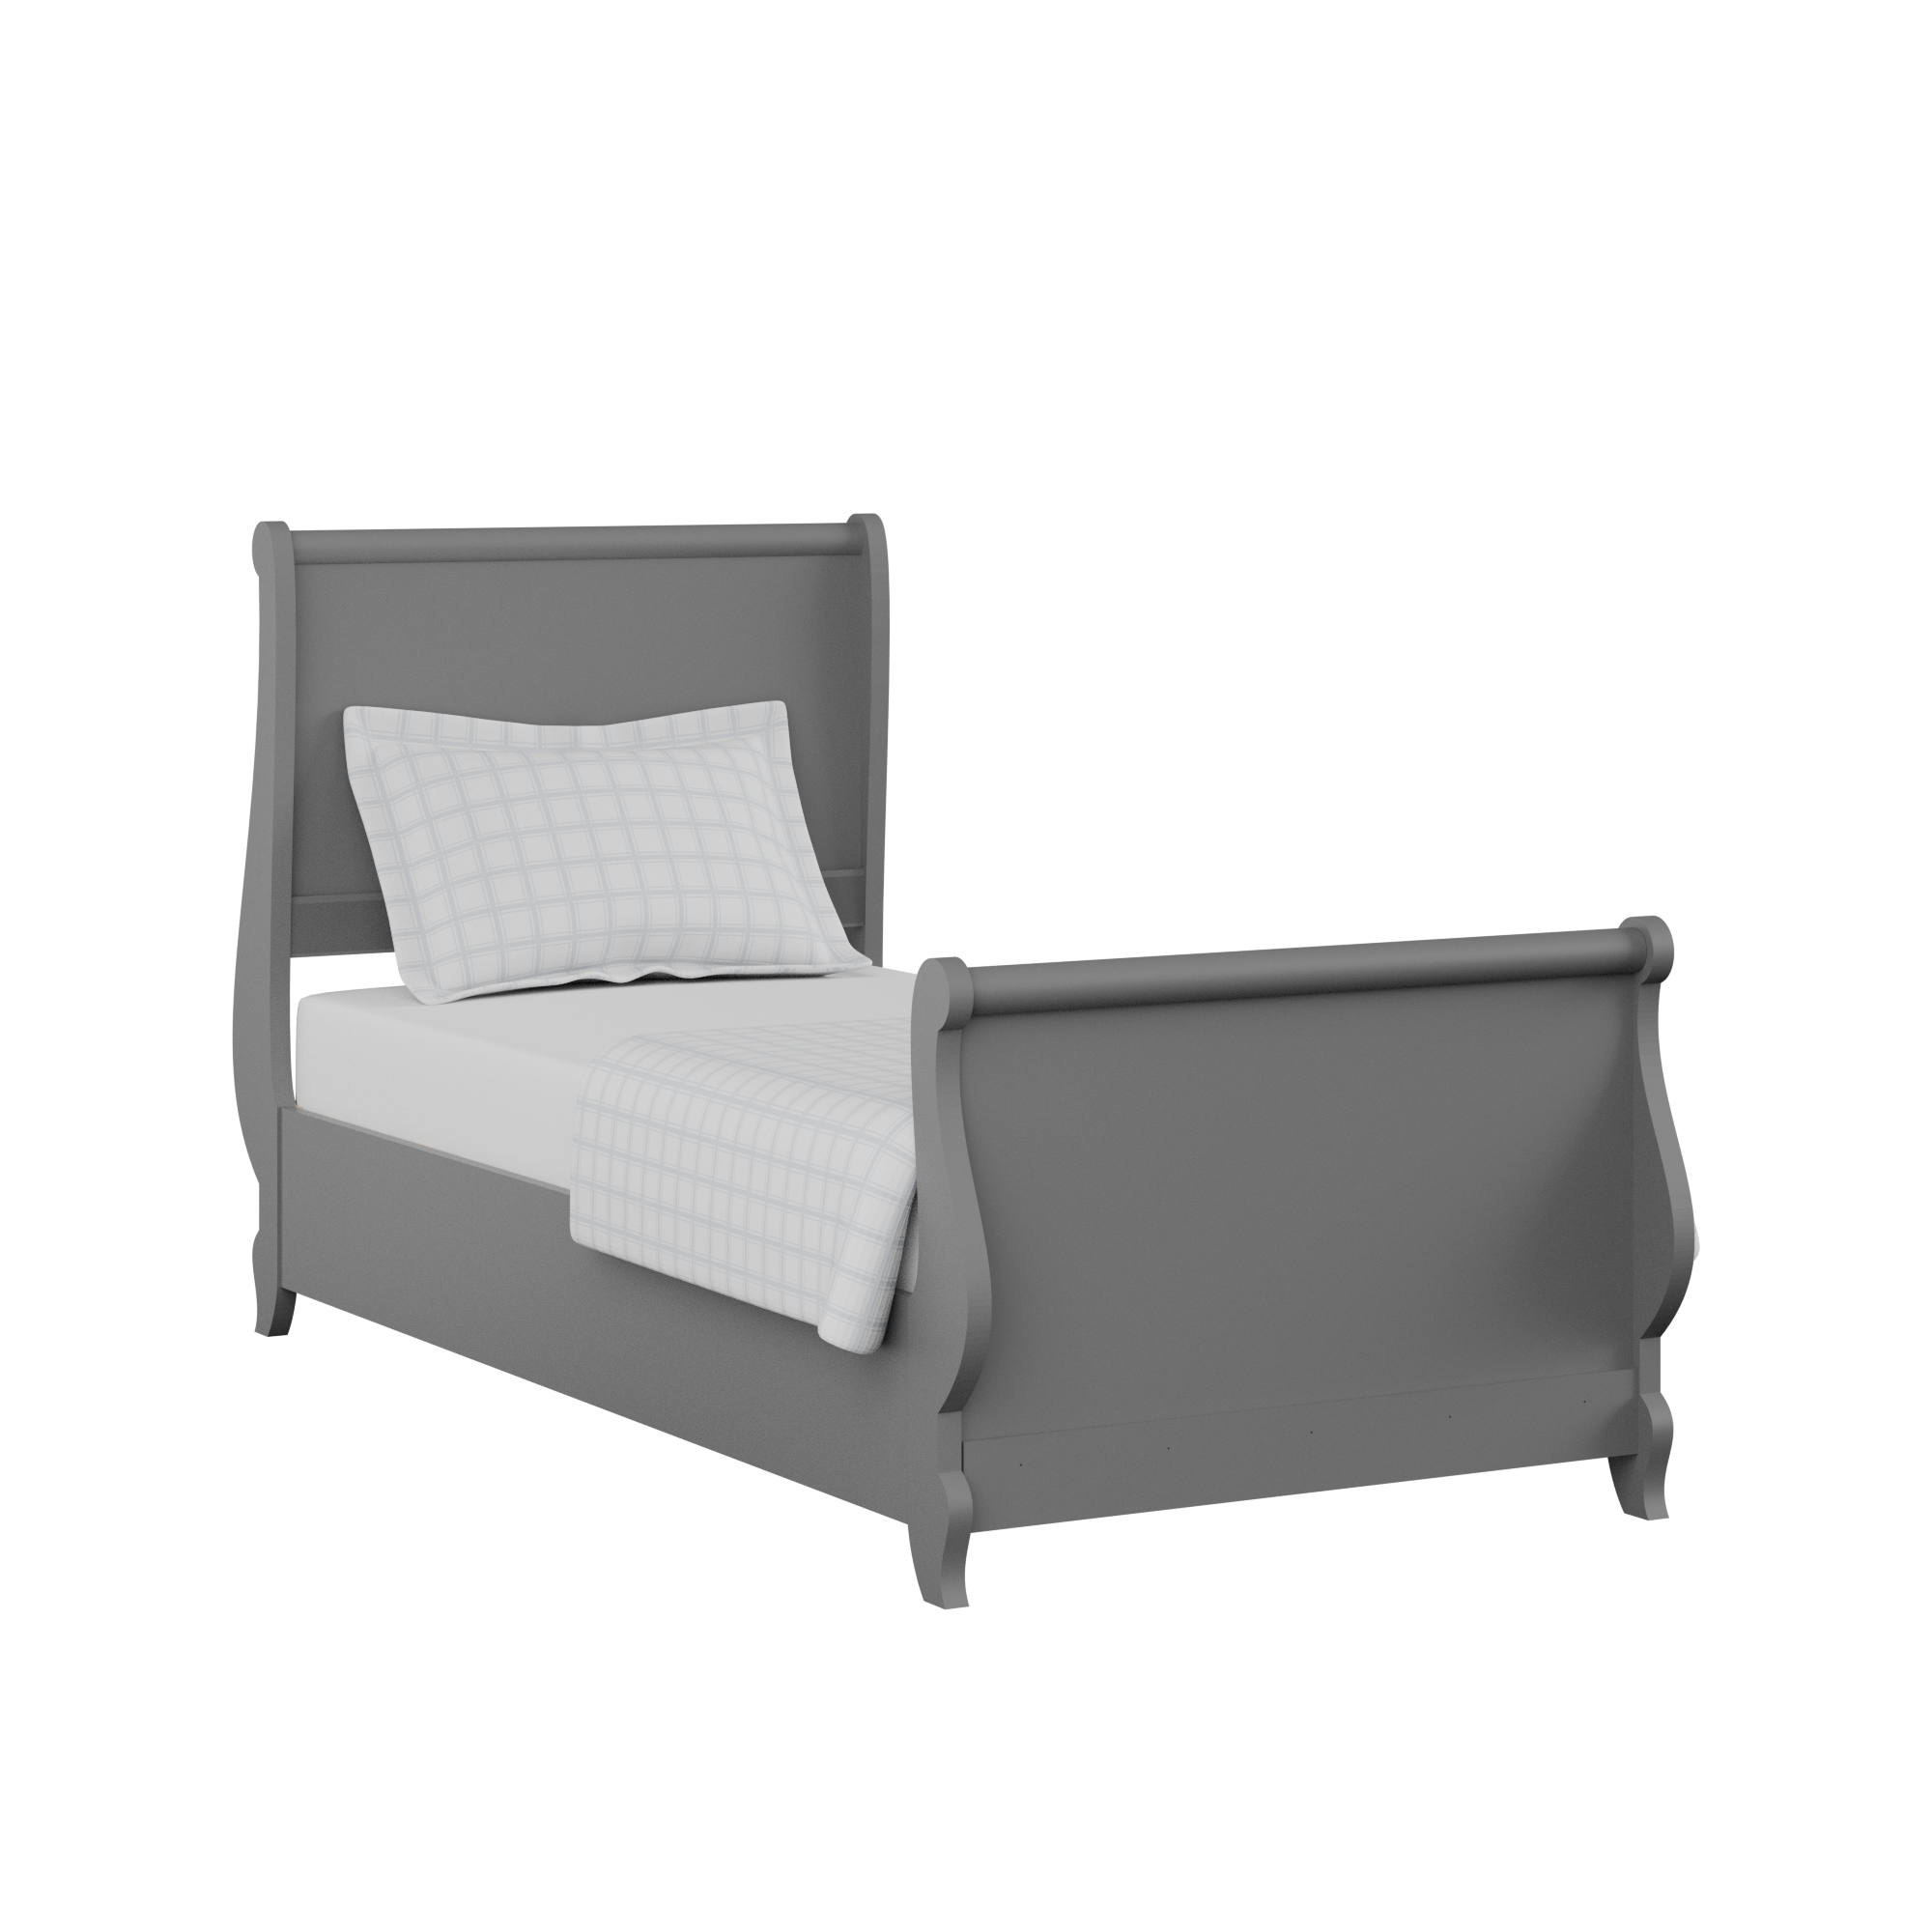 Elliot Painted single painted wood bed in grey with Juno mattress